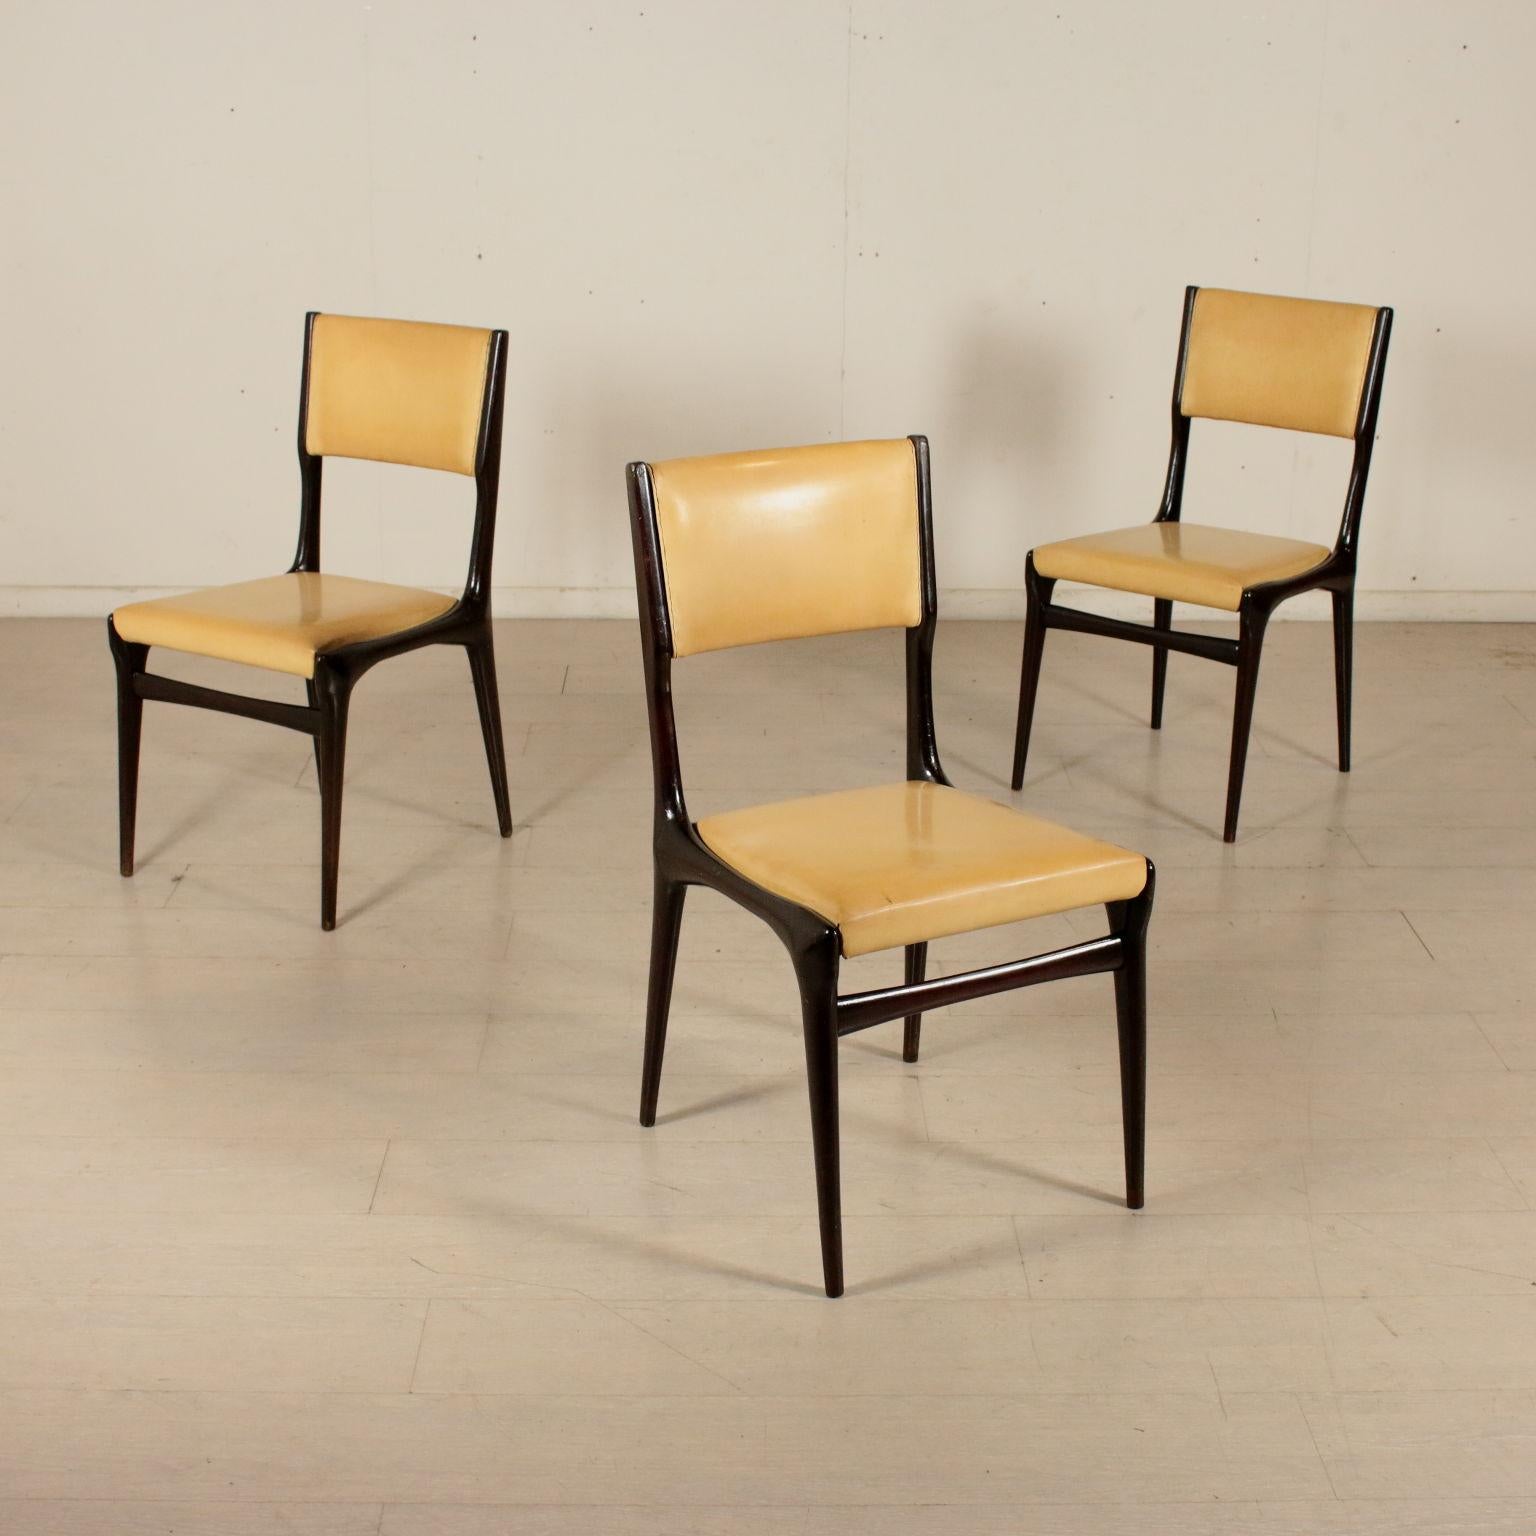 A set of three chairs designed by Carlo de Carli (1911-1999) for Cassina. Model: 671. Stained ebony, foam padding and skai upholstery. Manufactured in Italy, 1950s.